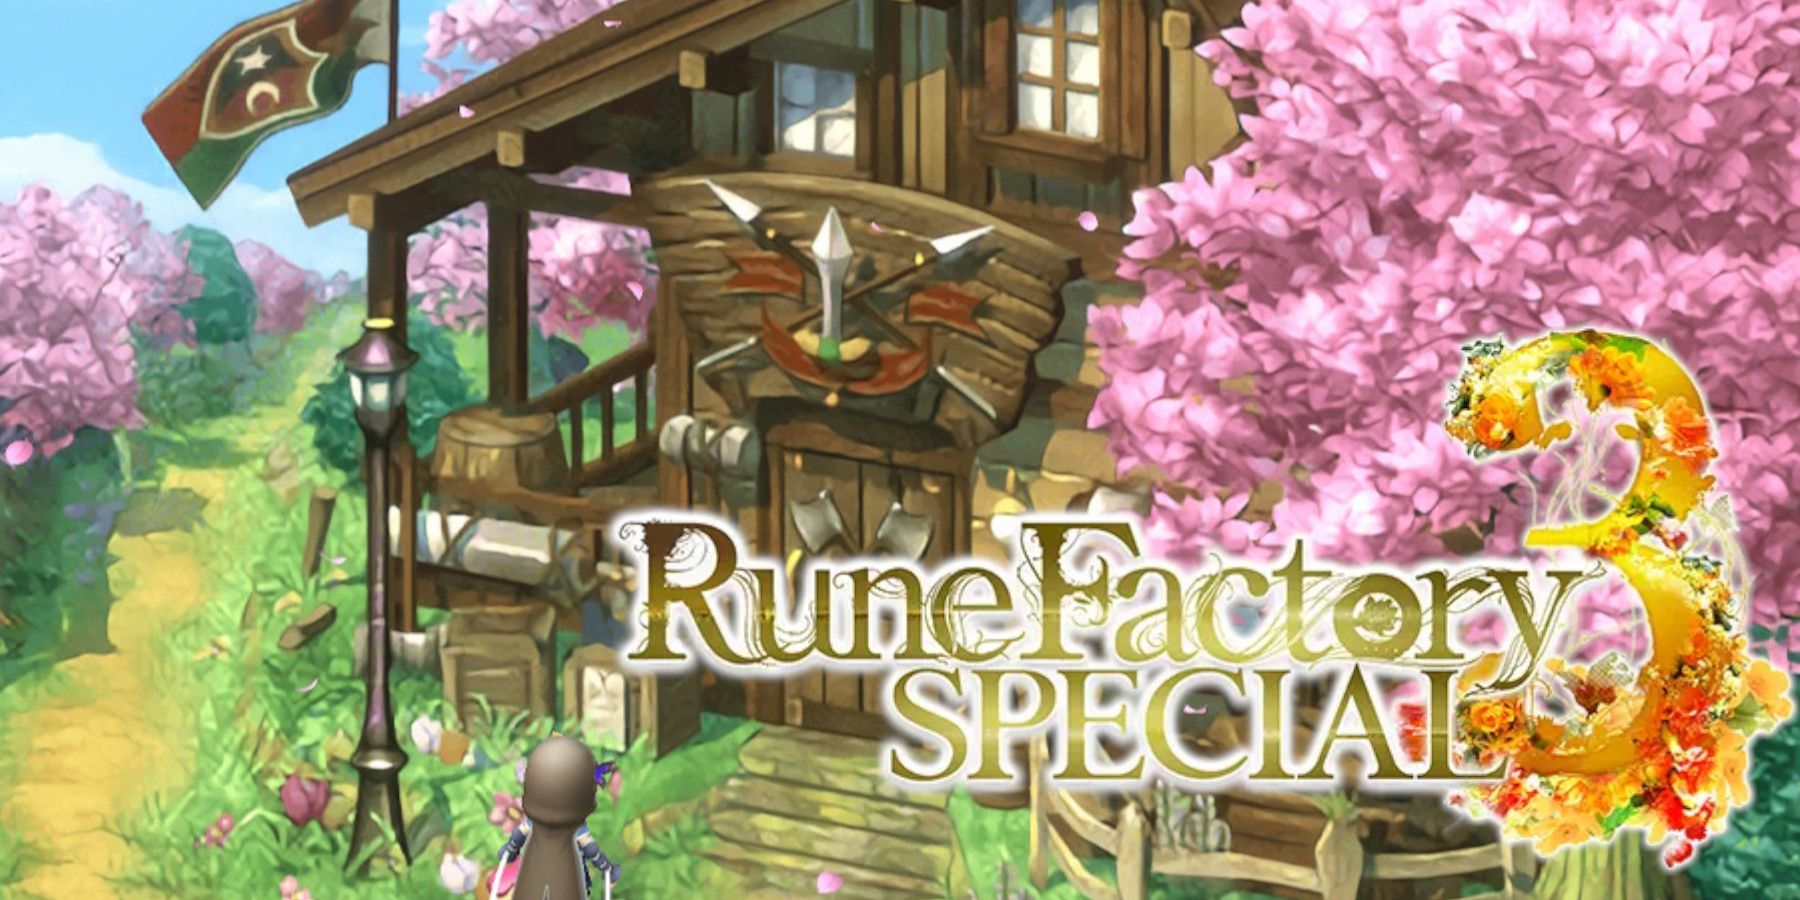 Rune-Factory-3-Special-Tool-Upgrades-Forge-01